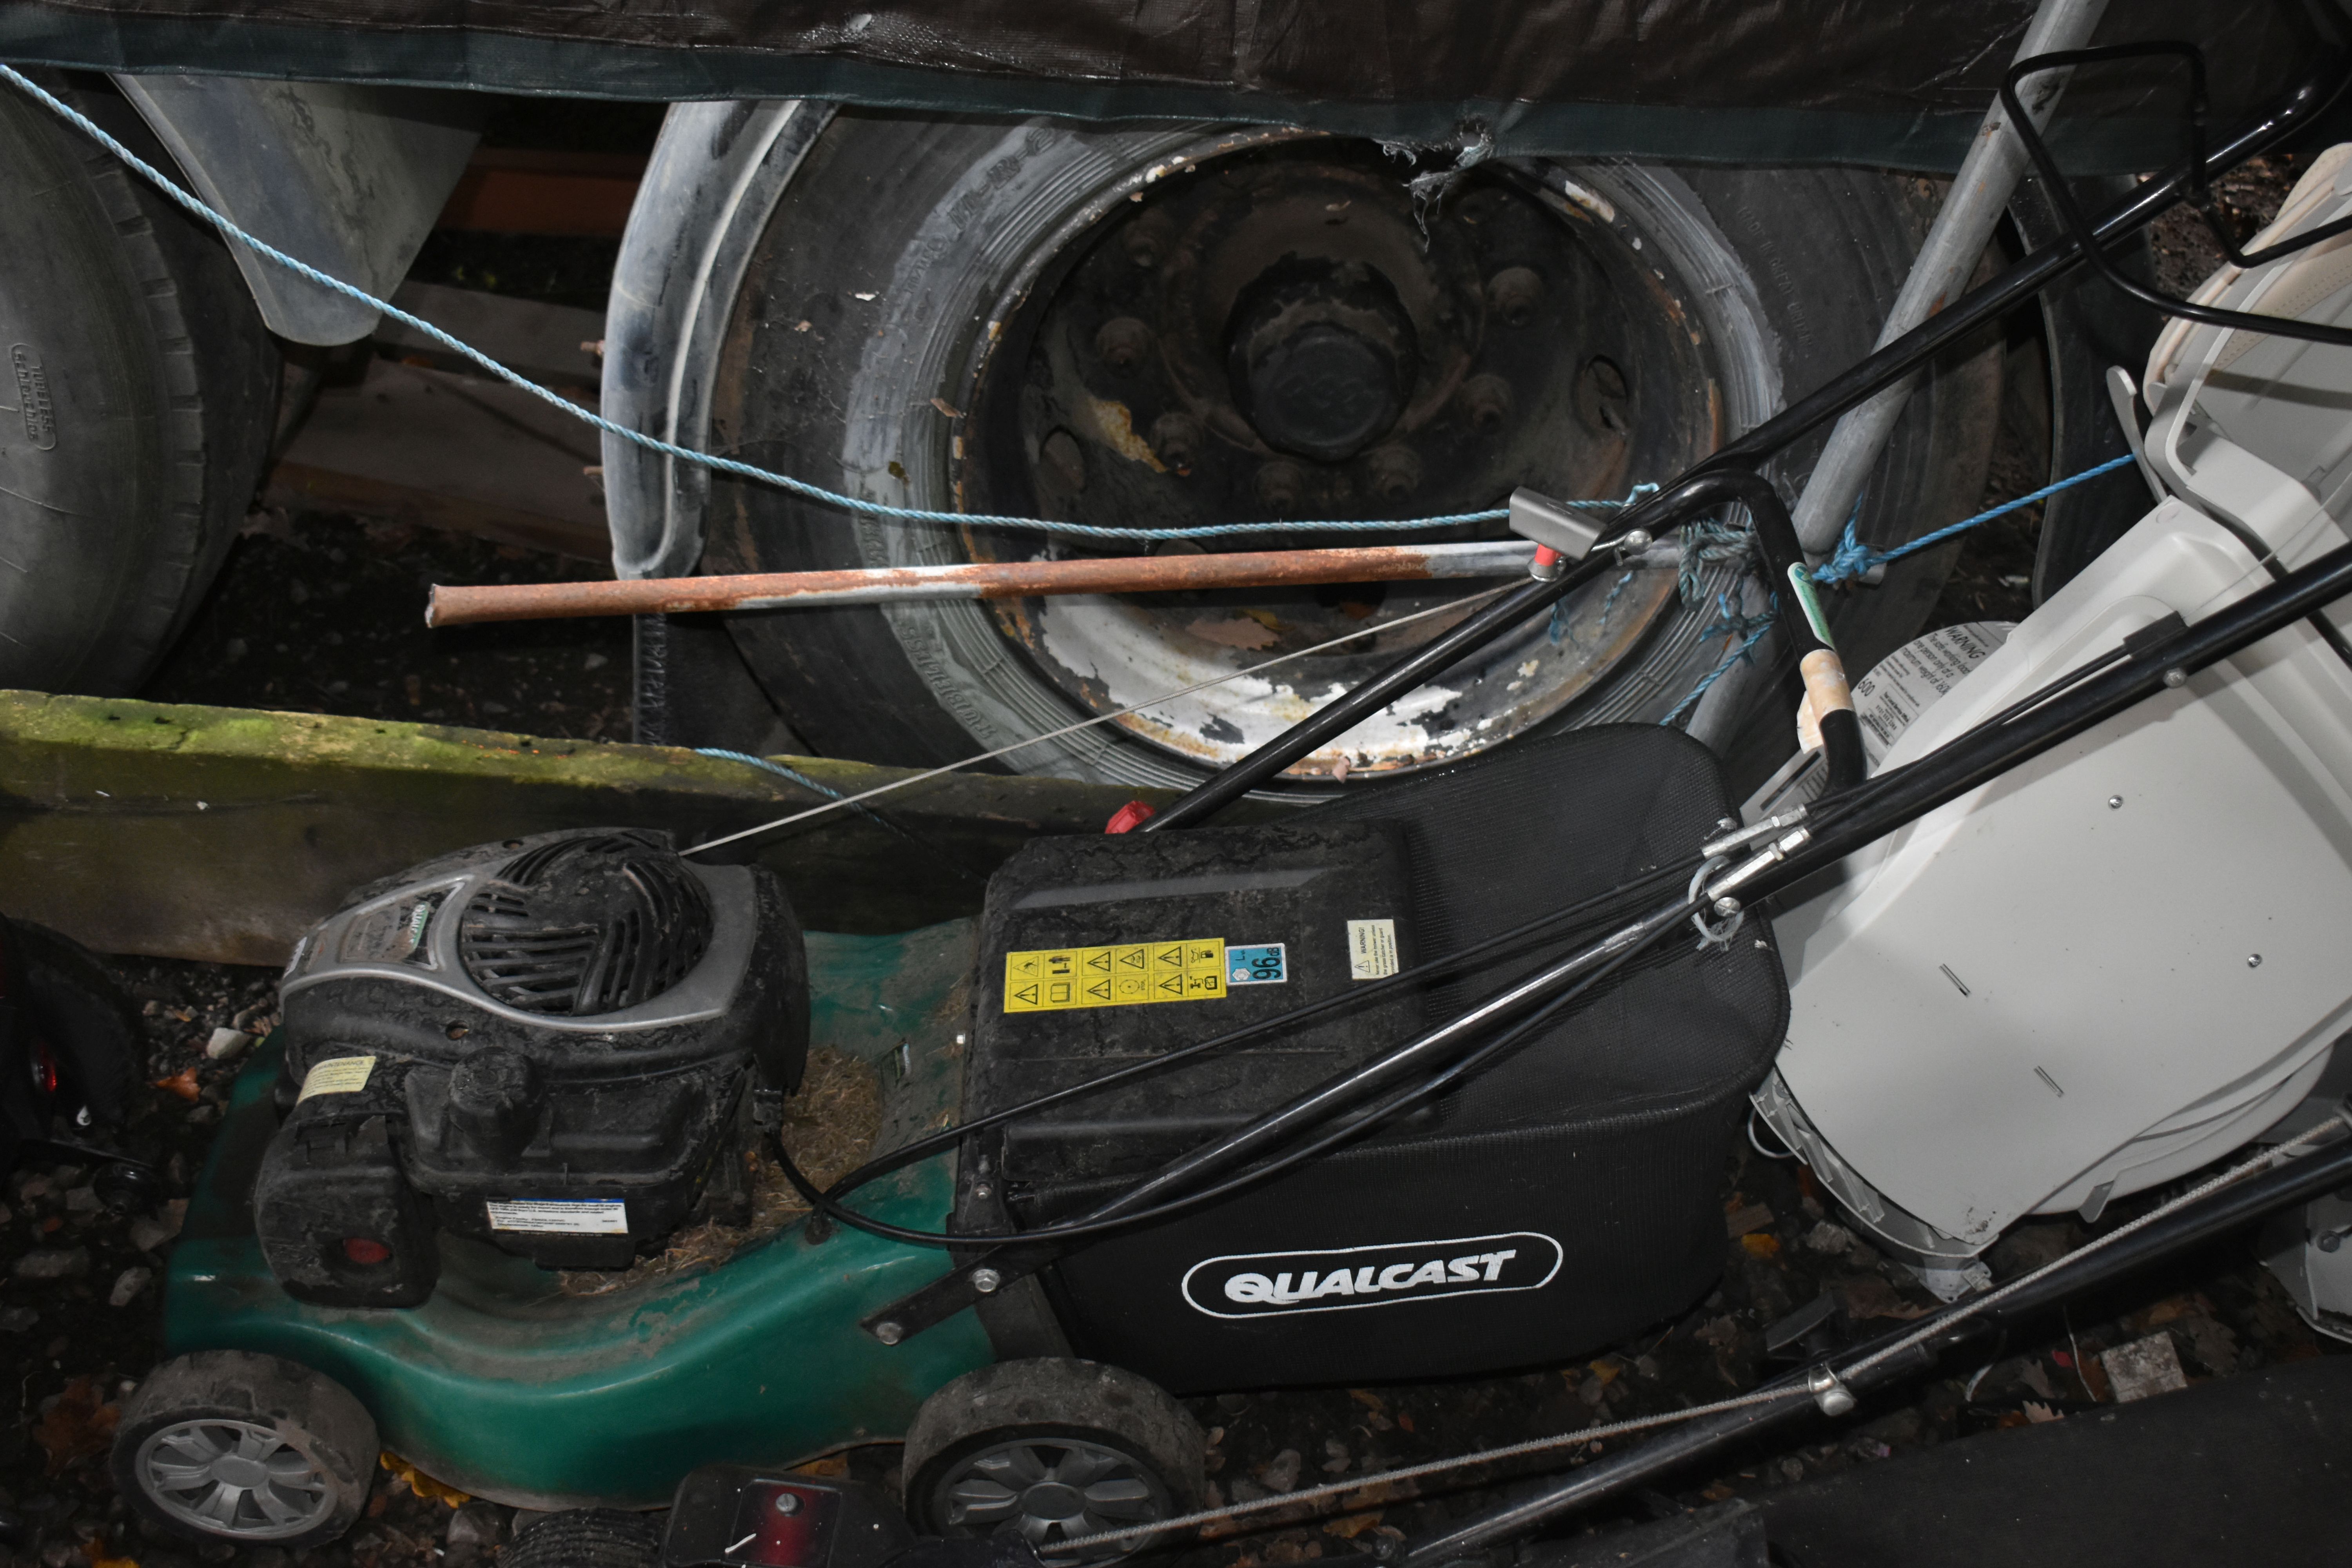 A QUALCAST 41CM SELF PROPELLED PETROL LAWNMOWER (condition report: engine turns, untested any